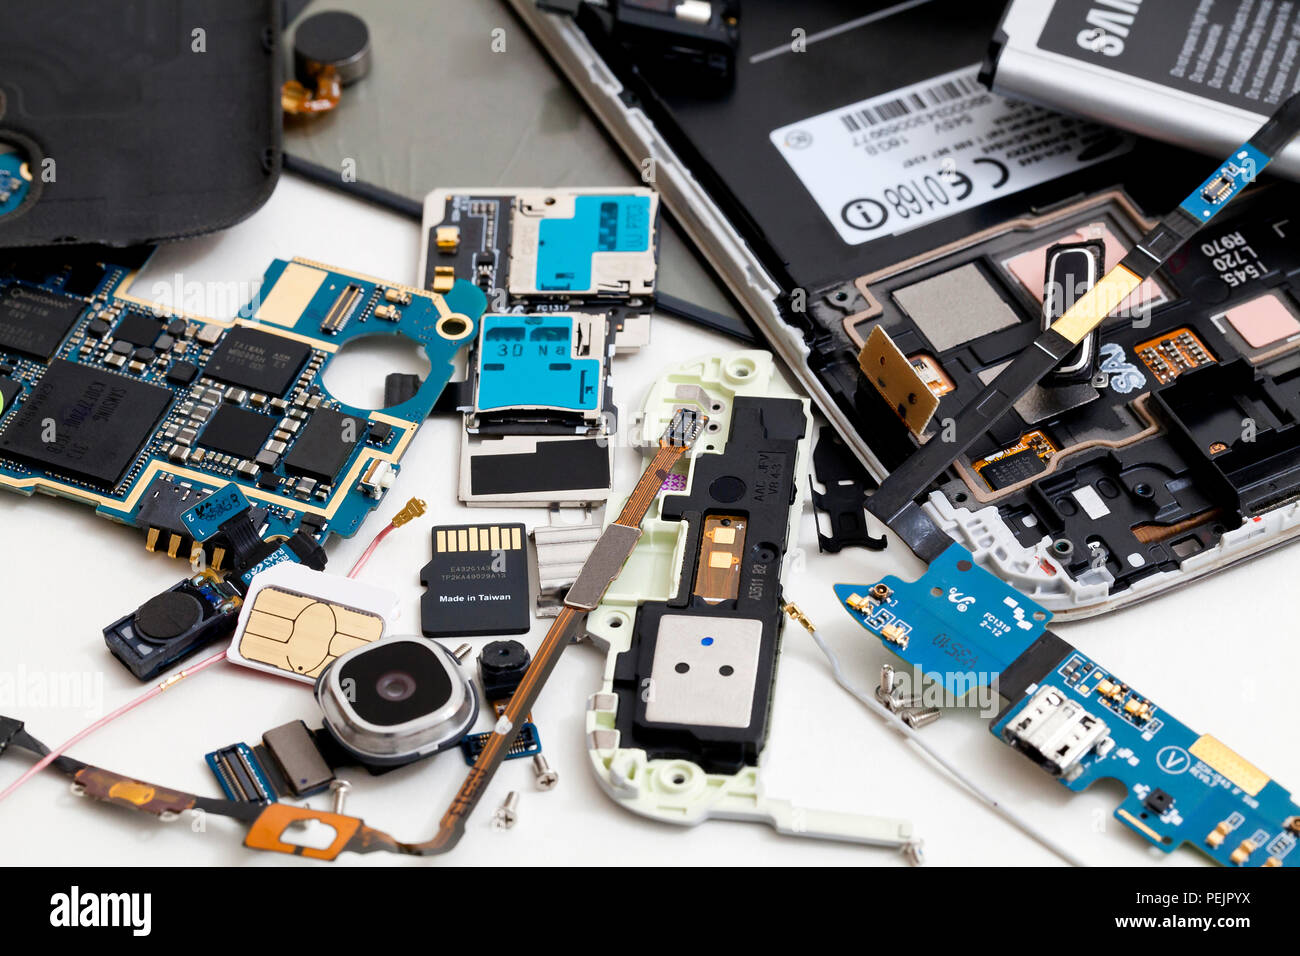 Disassembled Samsung Galaxy mobile phone, showing various internal components - USA Stock Photo